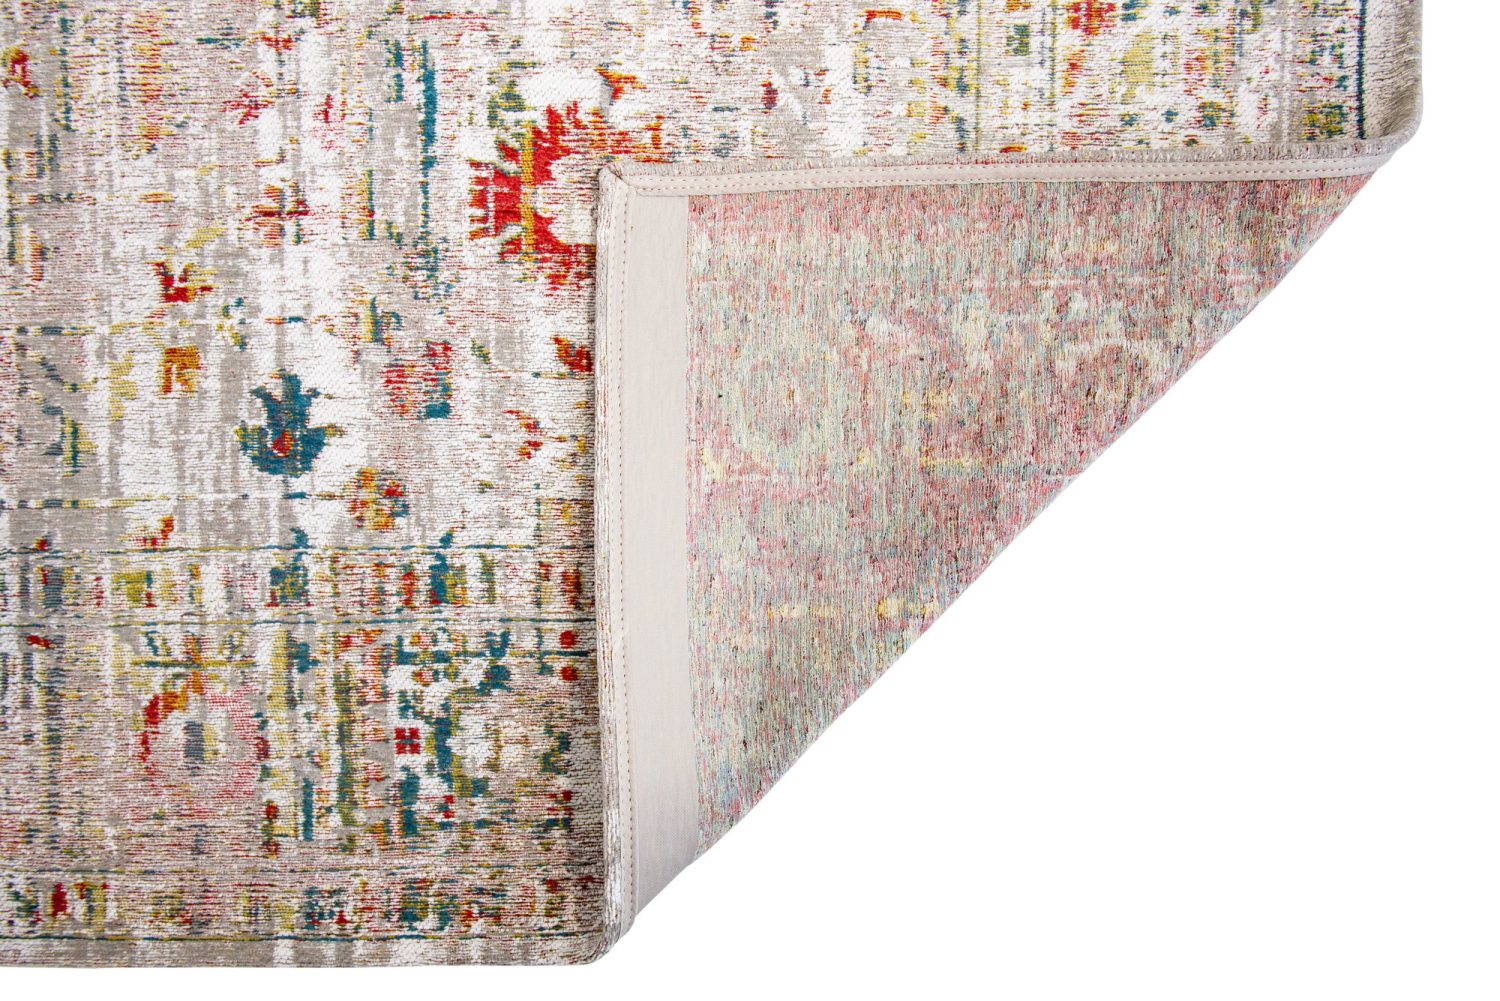 Ushak is derived from the rug designs made by the Turkish tribe of the same name